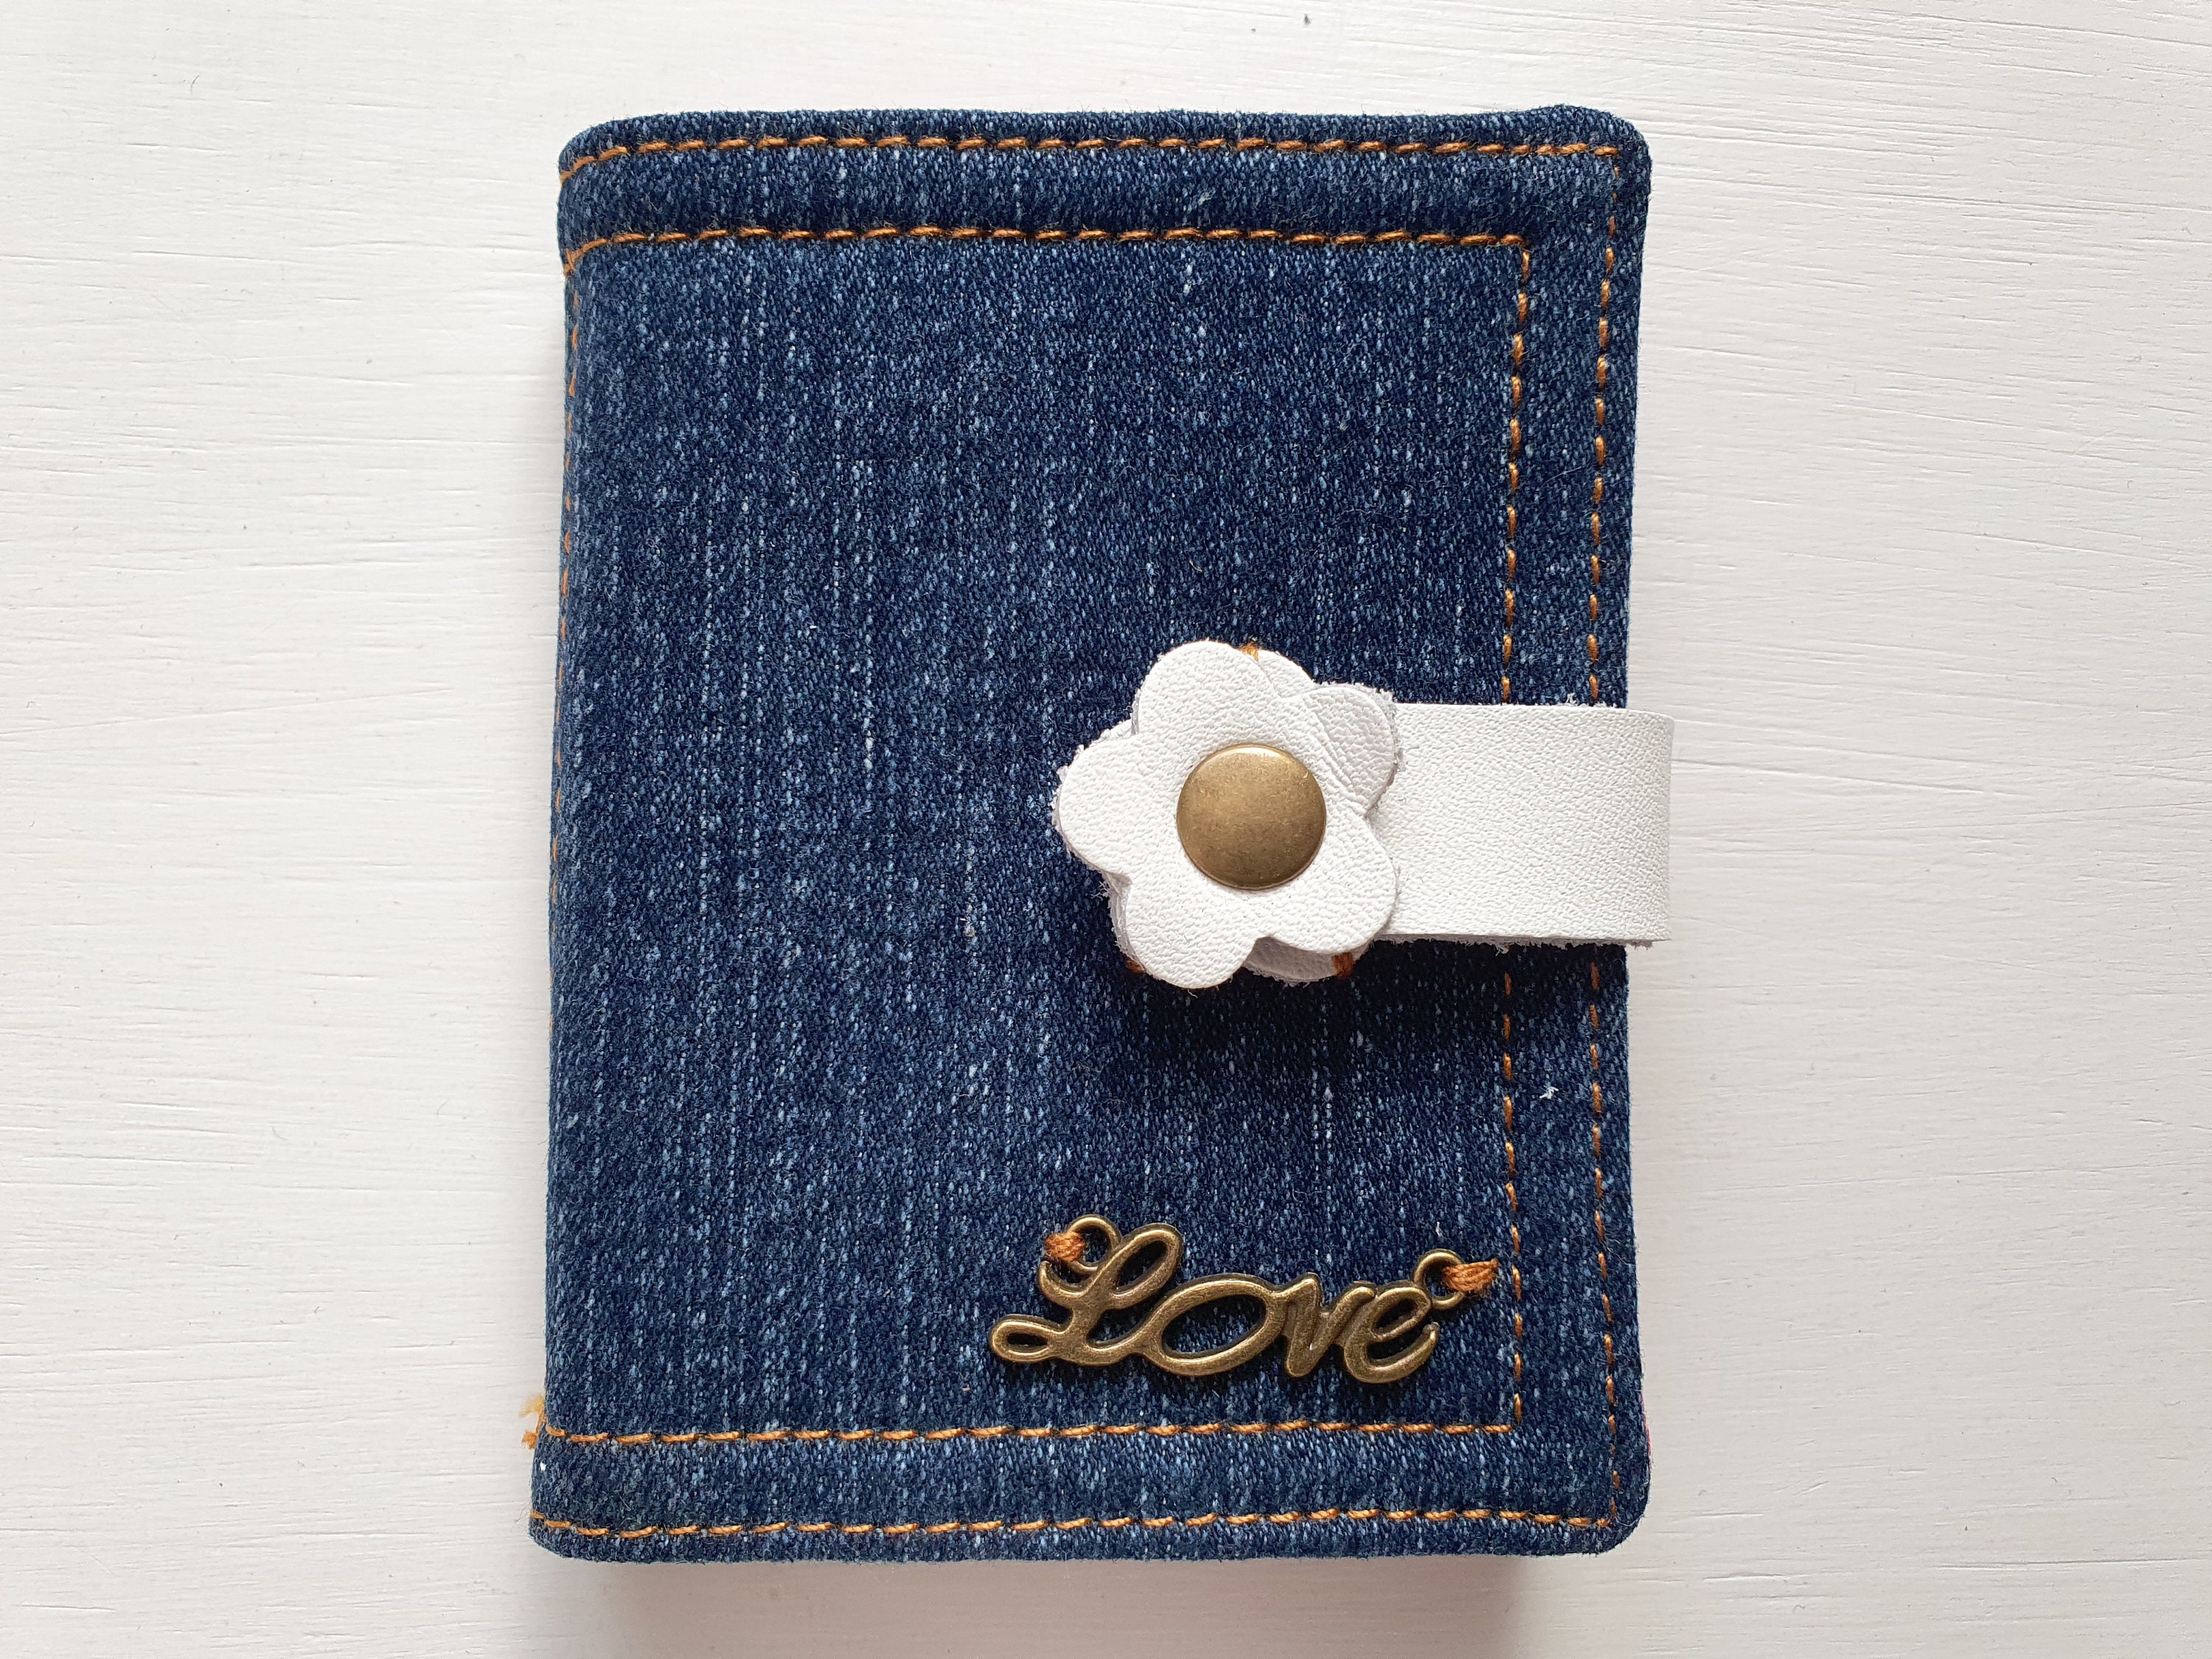 Business card case made from recycled denim and designer cotton textile